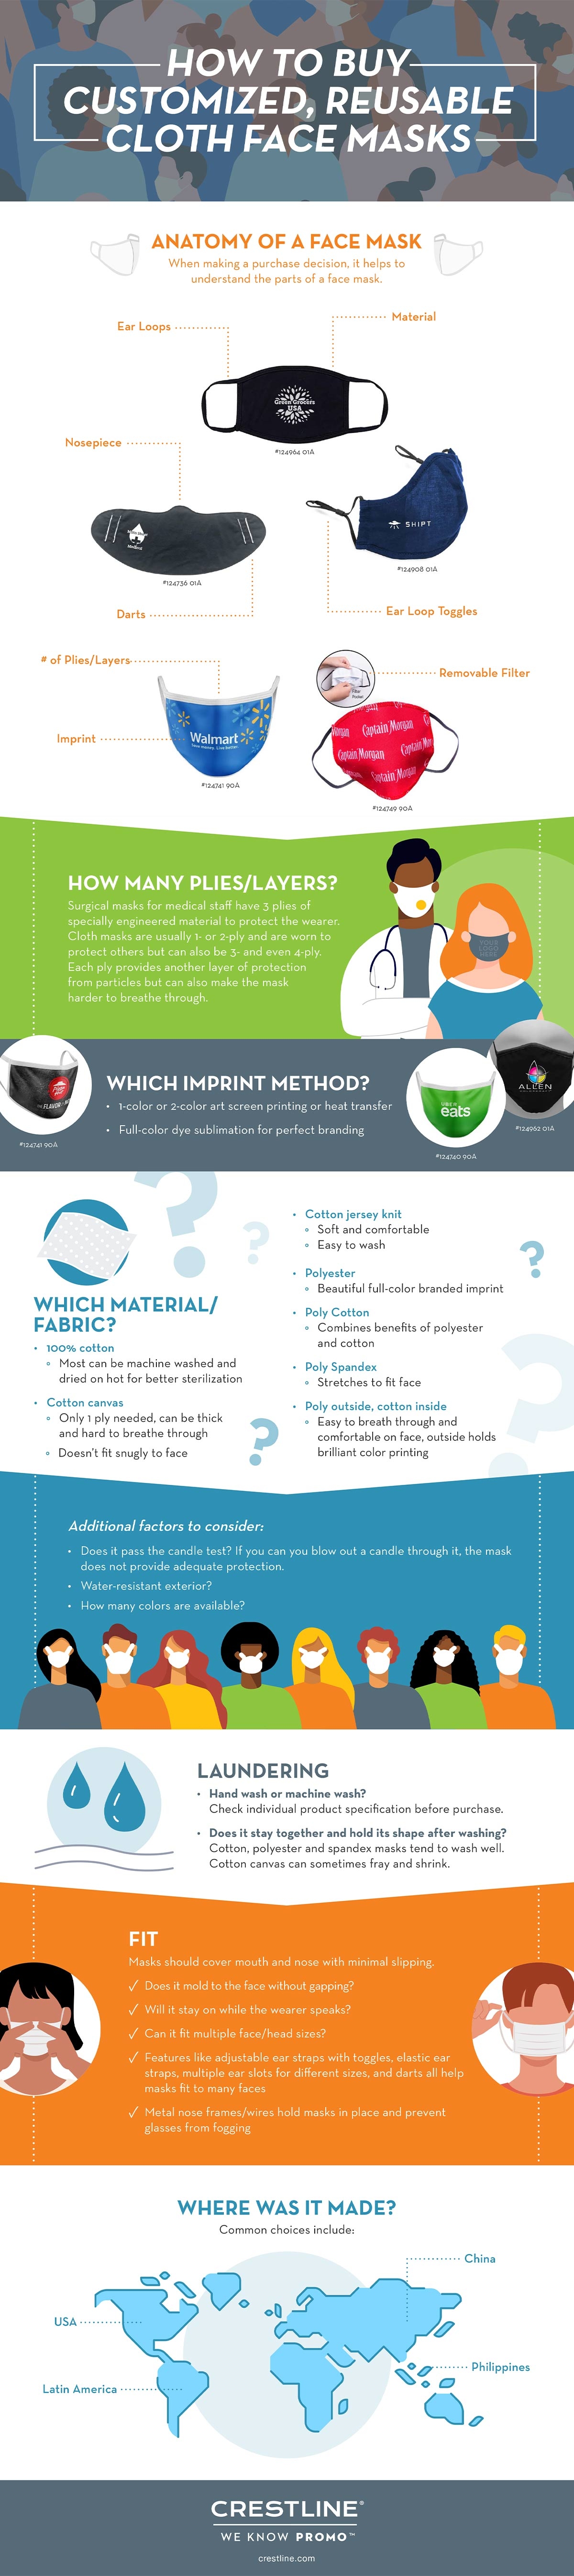 How to Buy Cloth Face Masks Infographic